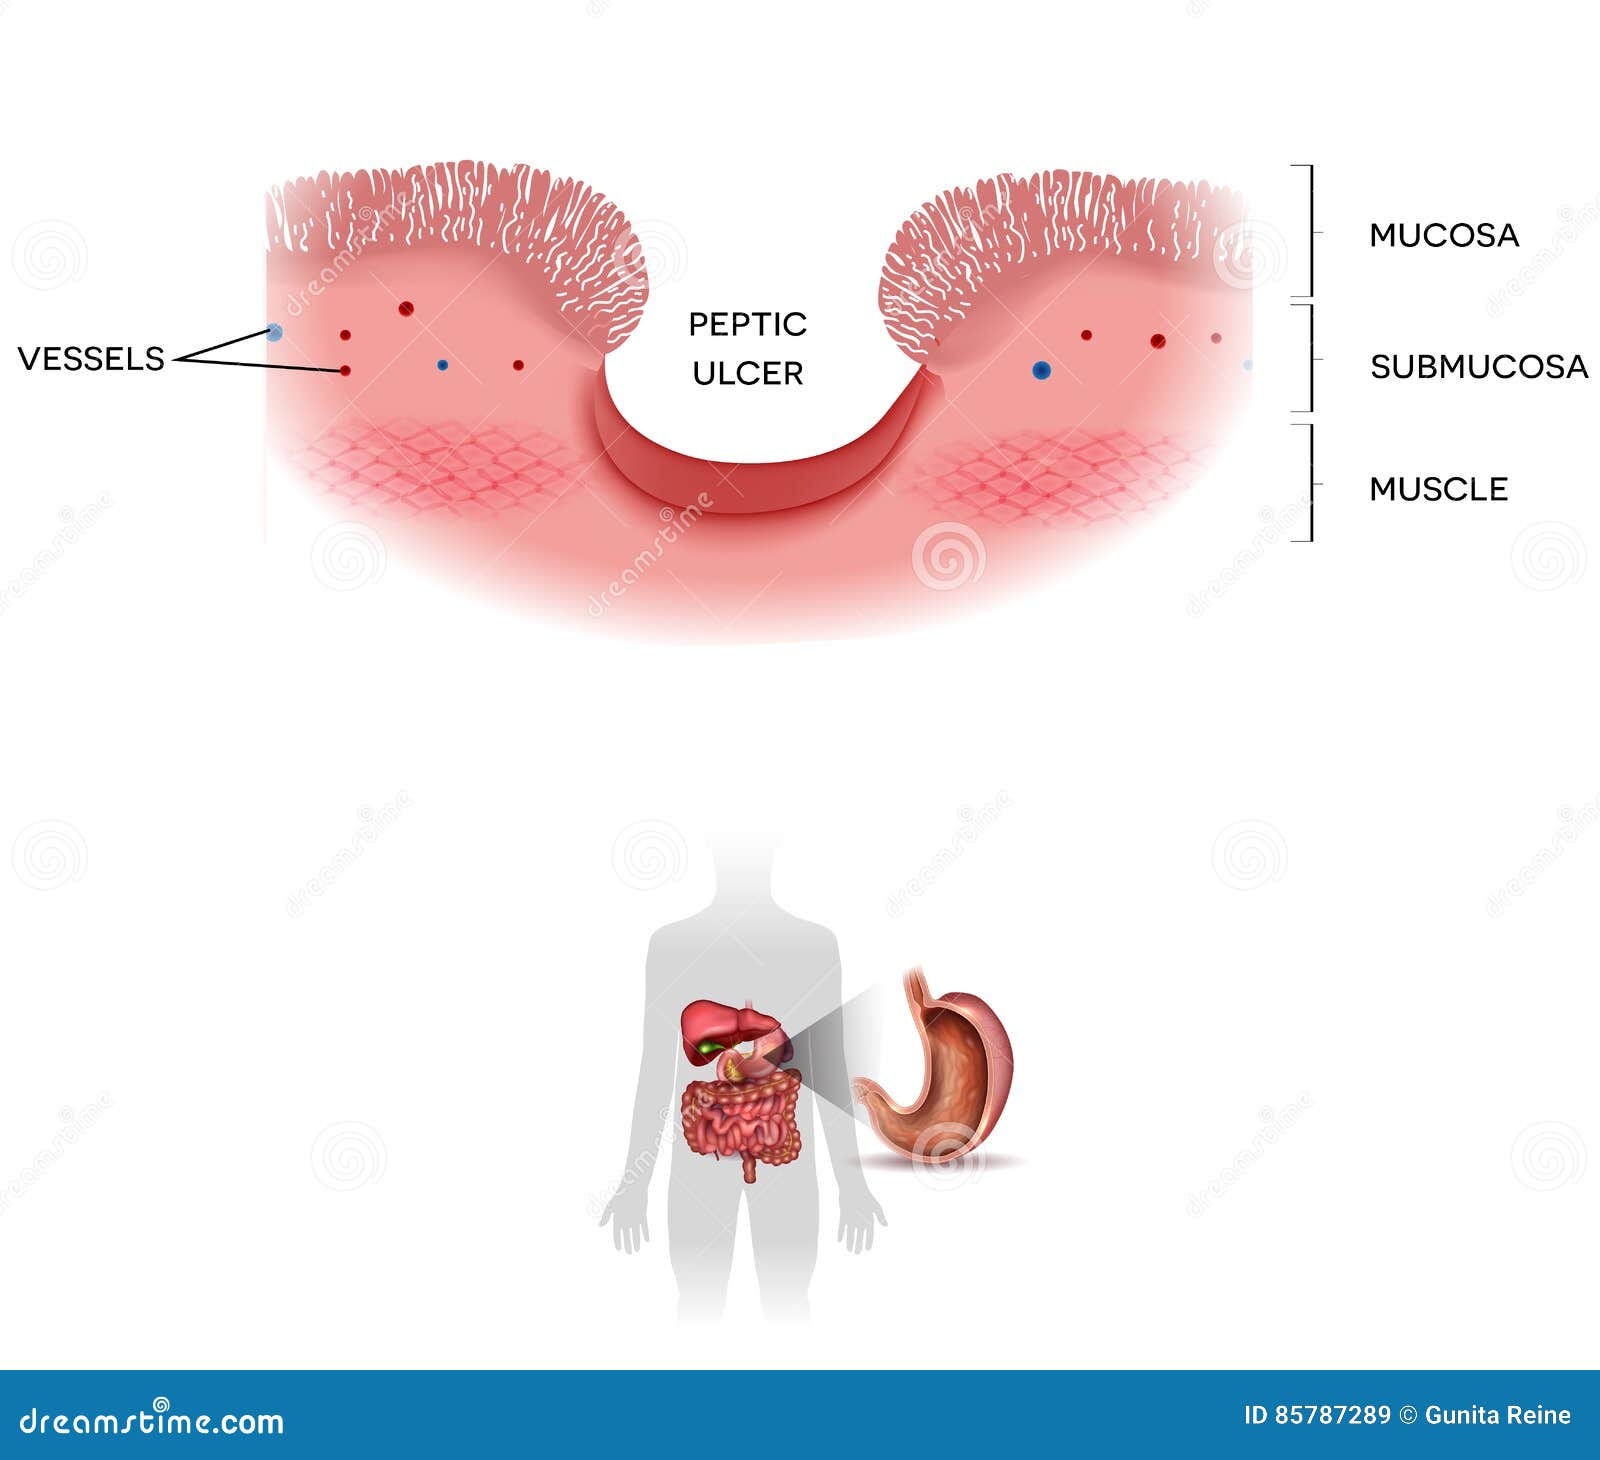 Peptic Ulcer Of The Stomach Stock Vector